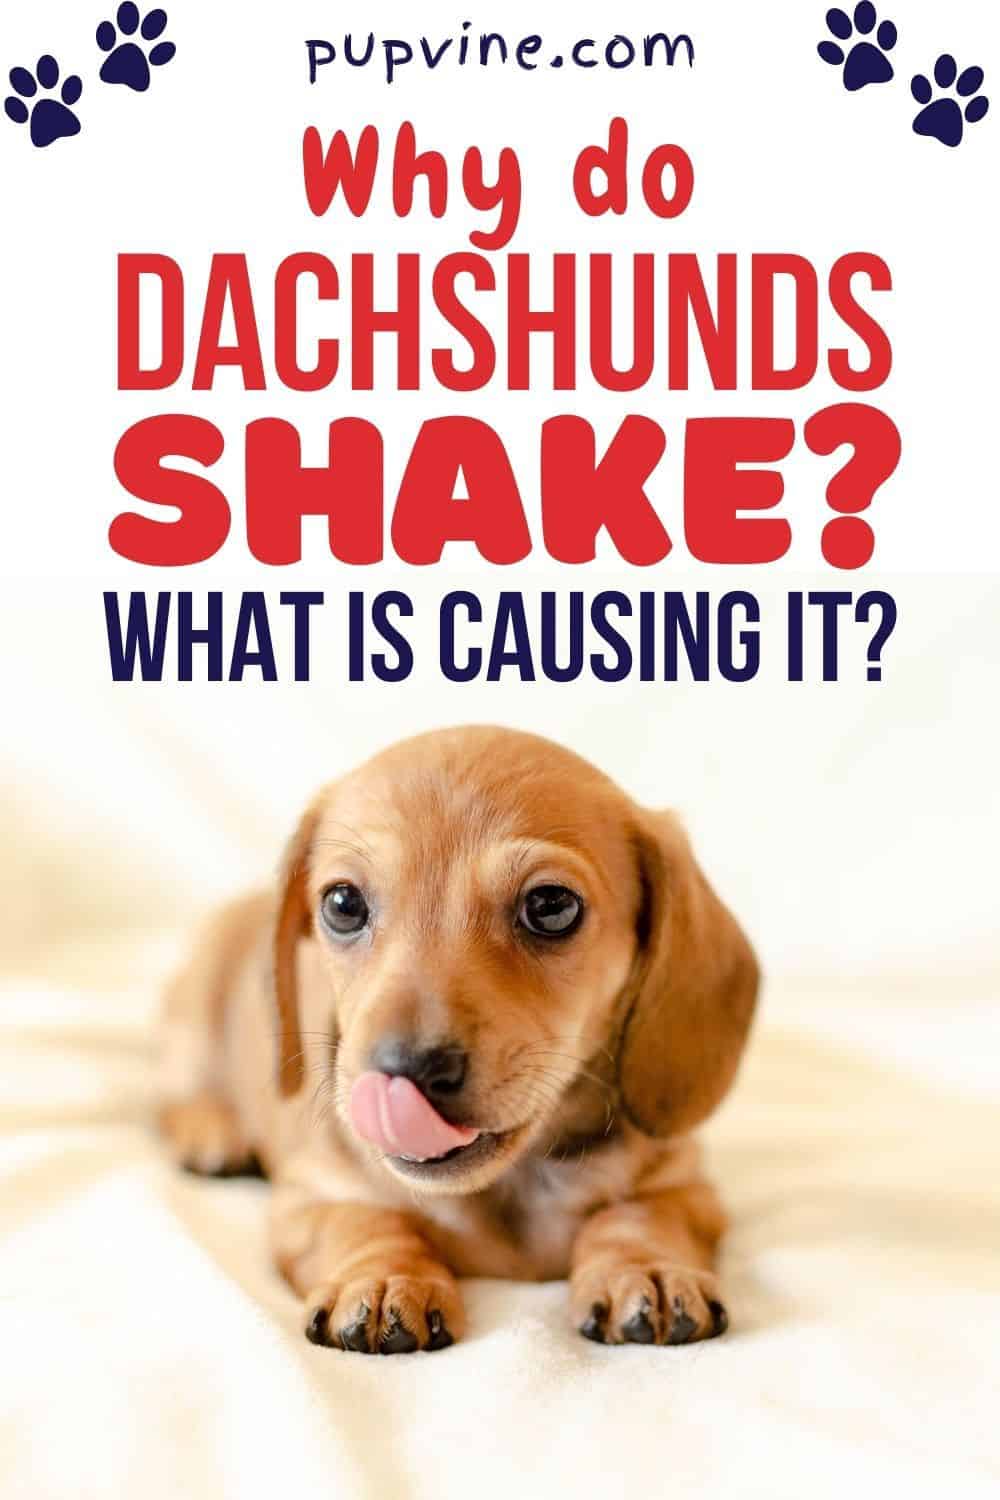 Why Do Dachshunds Shake? What Is Causing It?